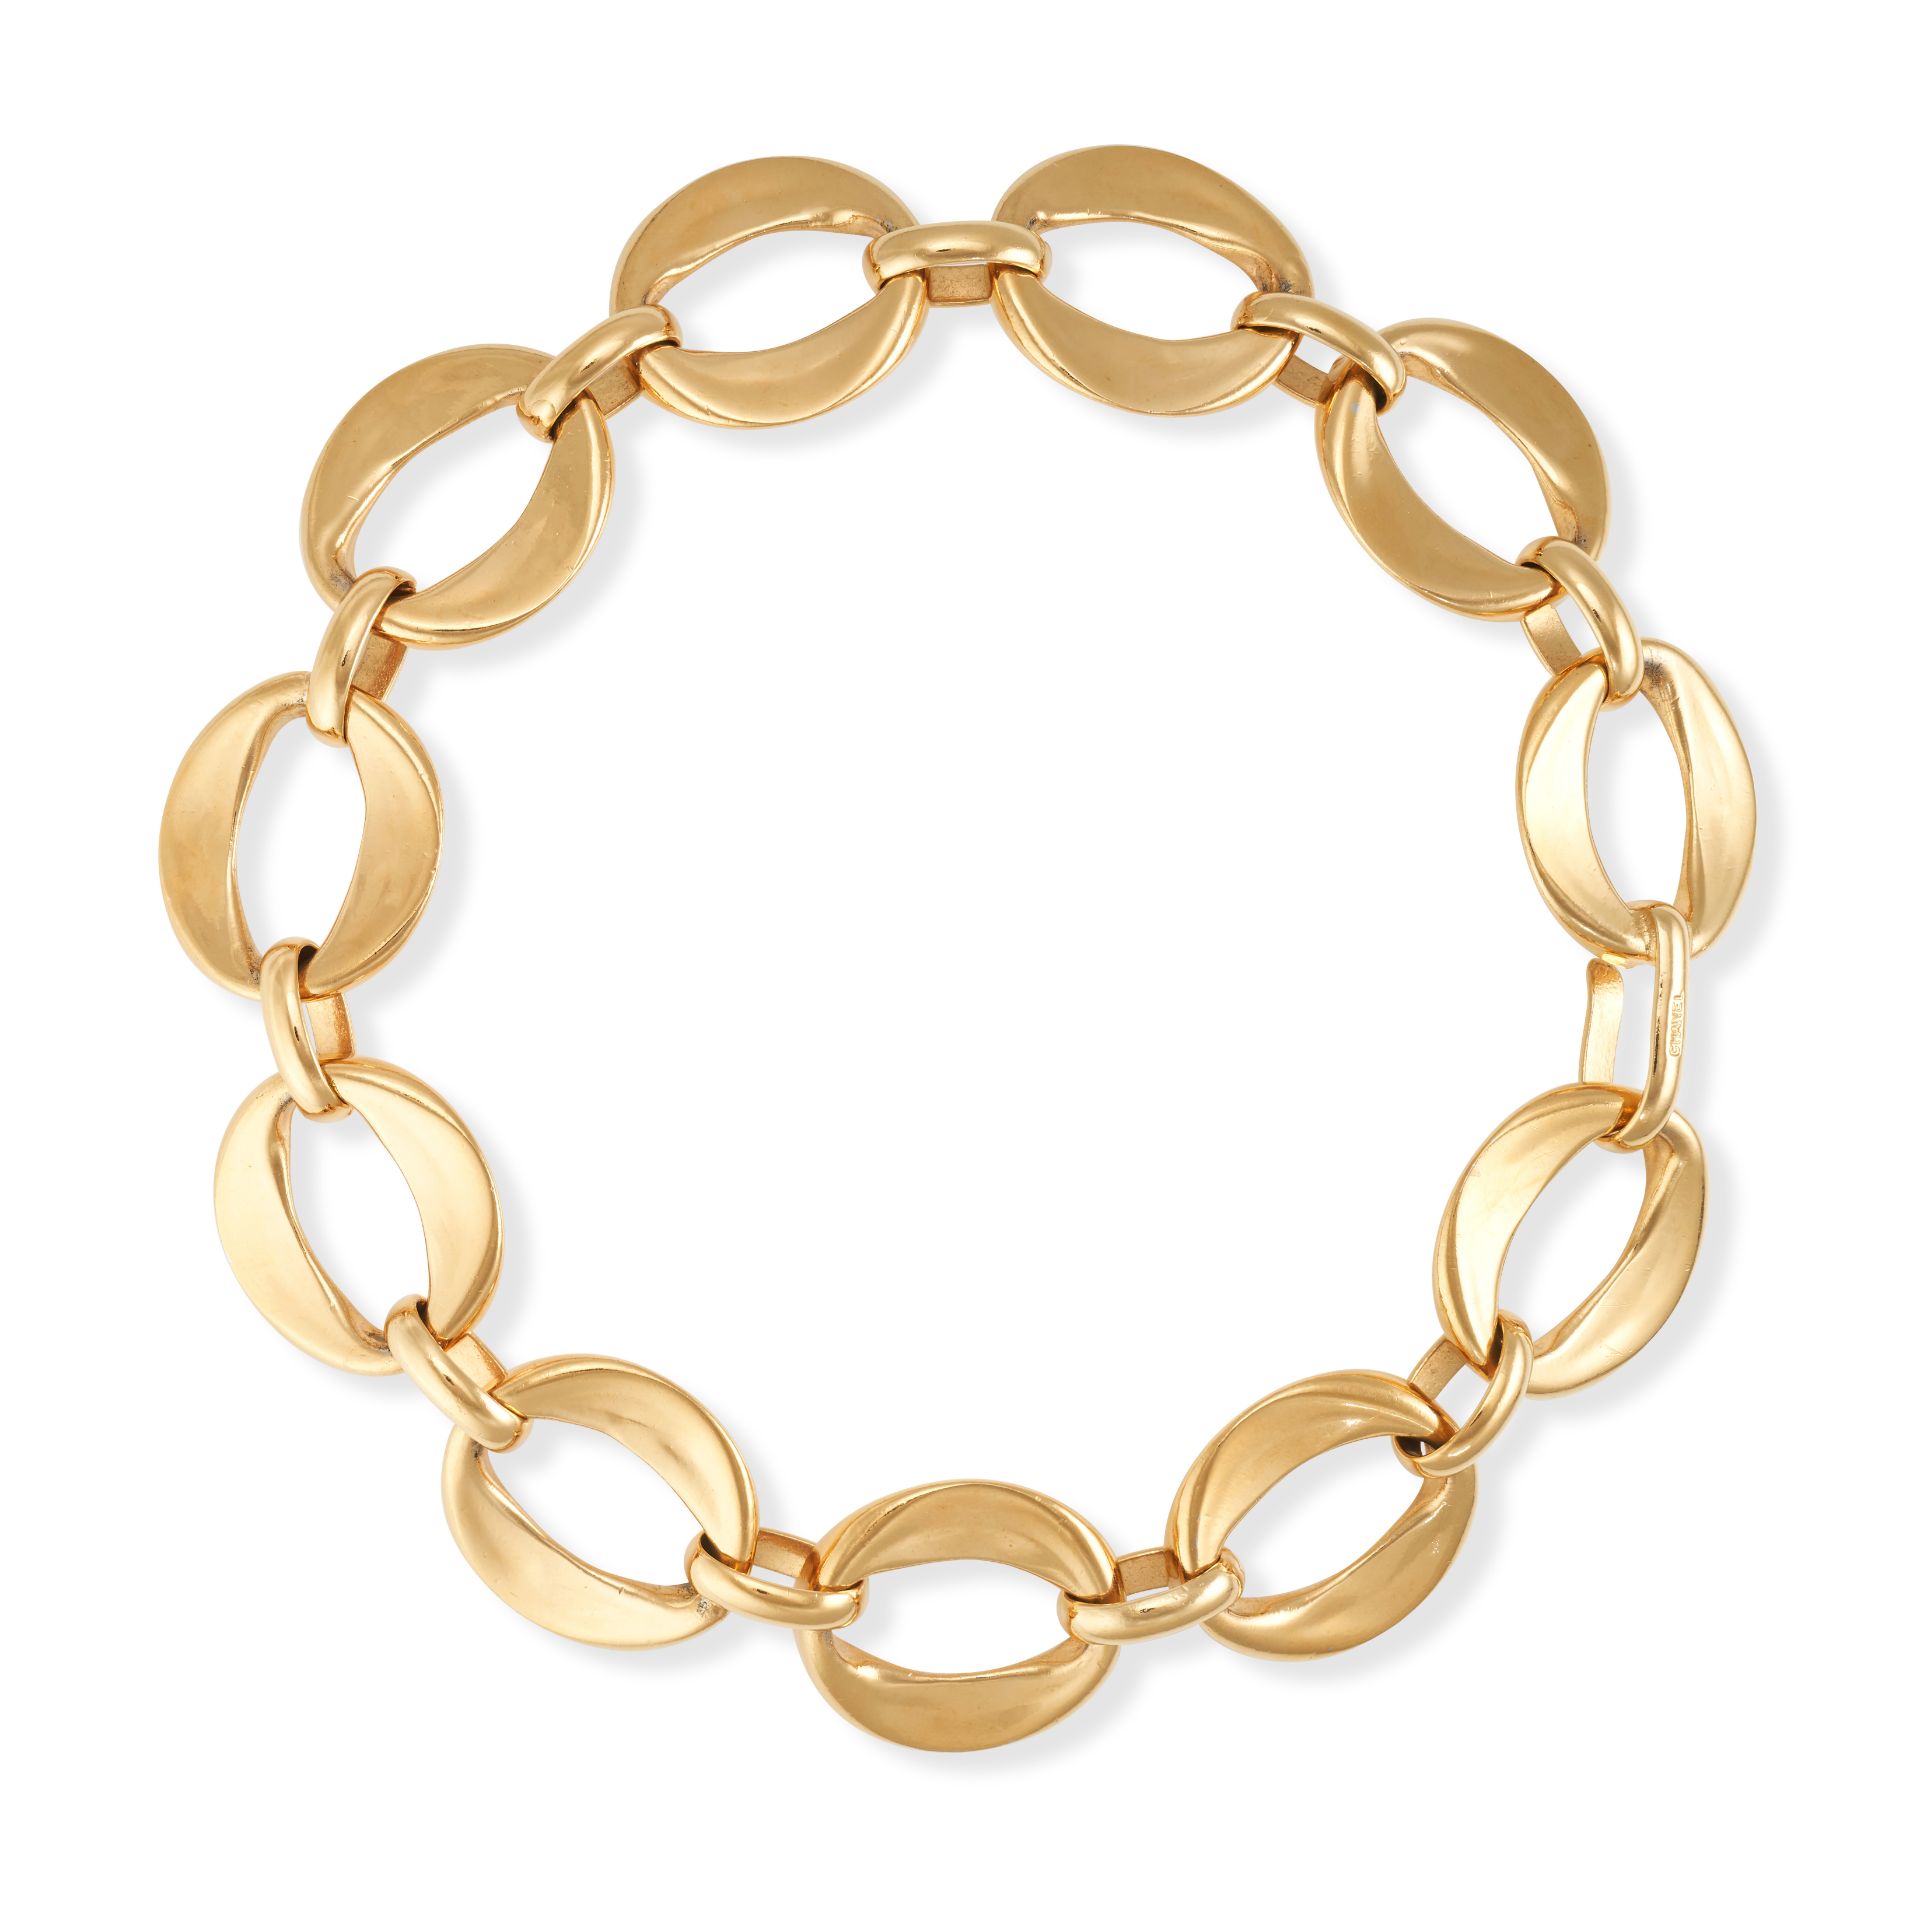 CHANEL OVAL LINK CHOKER NECKLACE